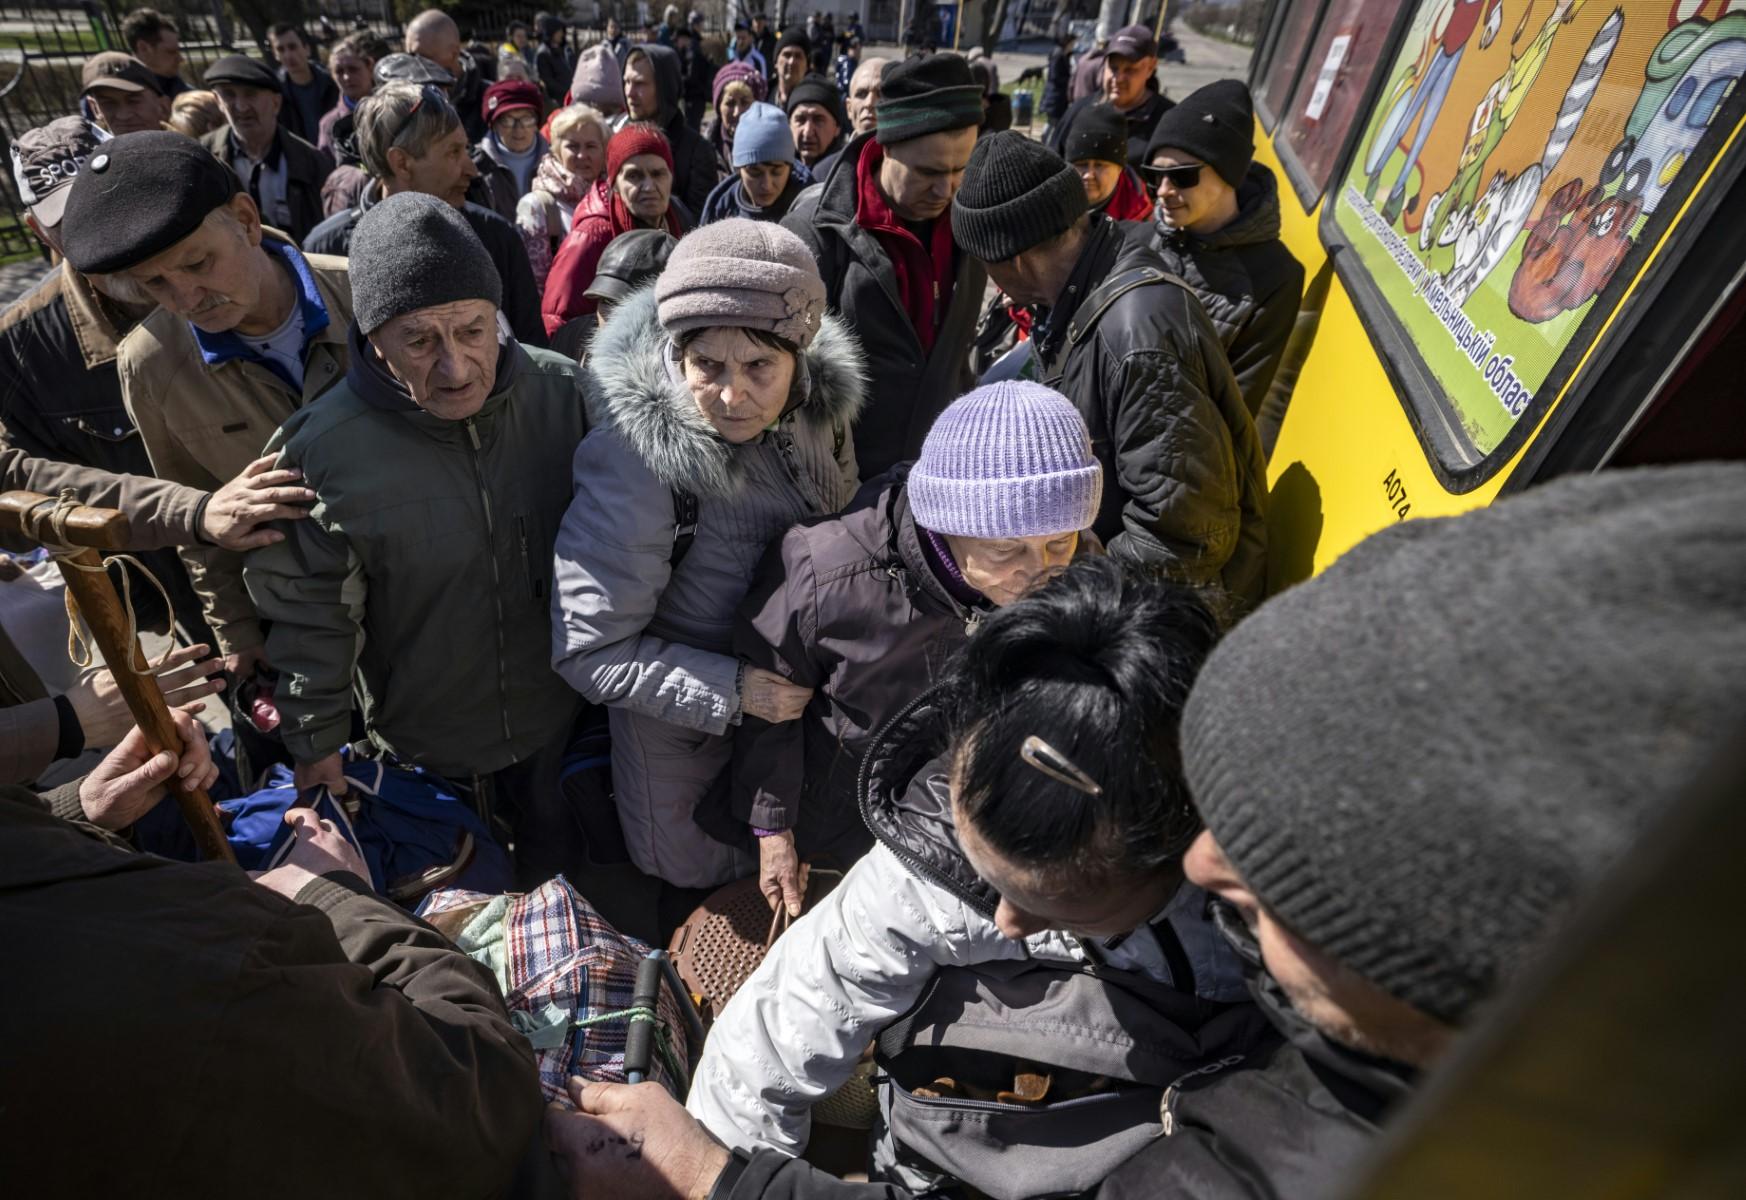 People wait for a bus at a train station in Severodonetsk, eastern Ukraine, on April 7, as they flee the city in the Donbas region. Photo: AFP